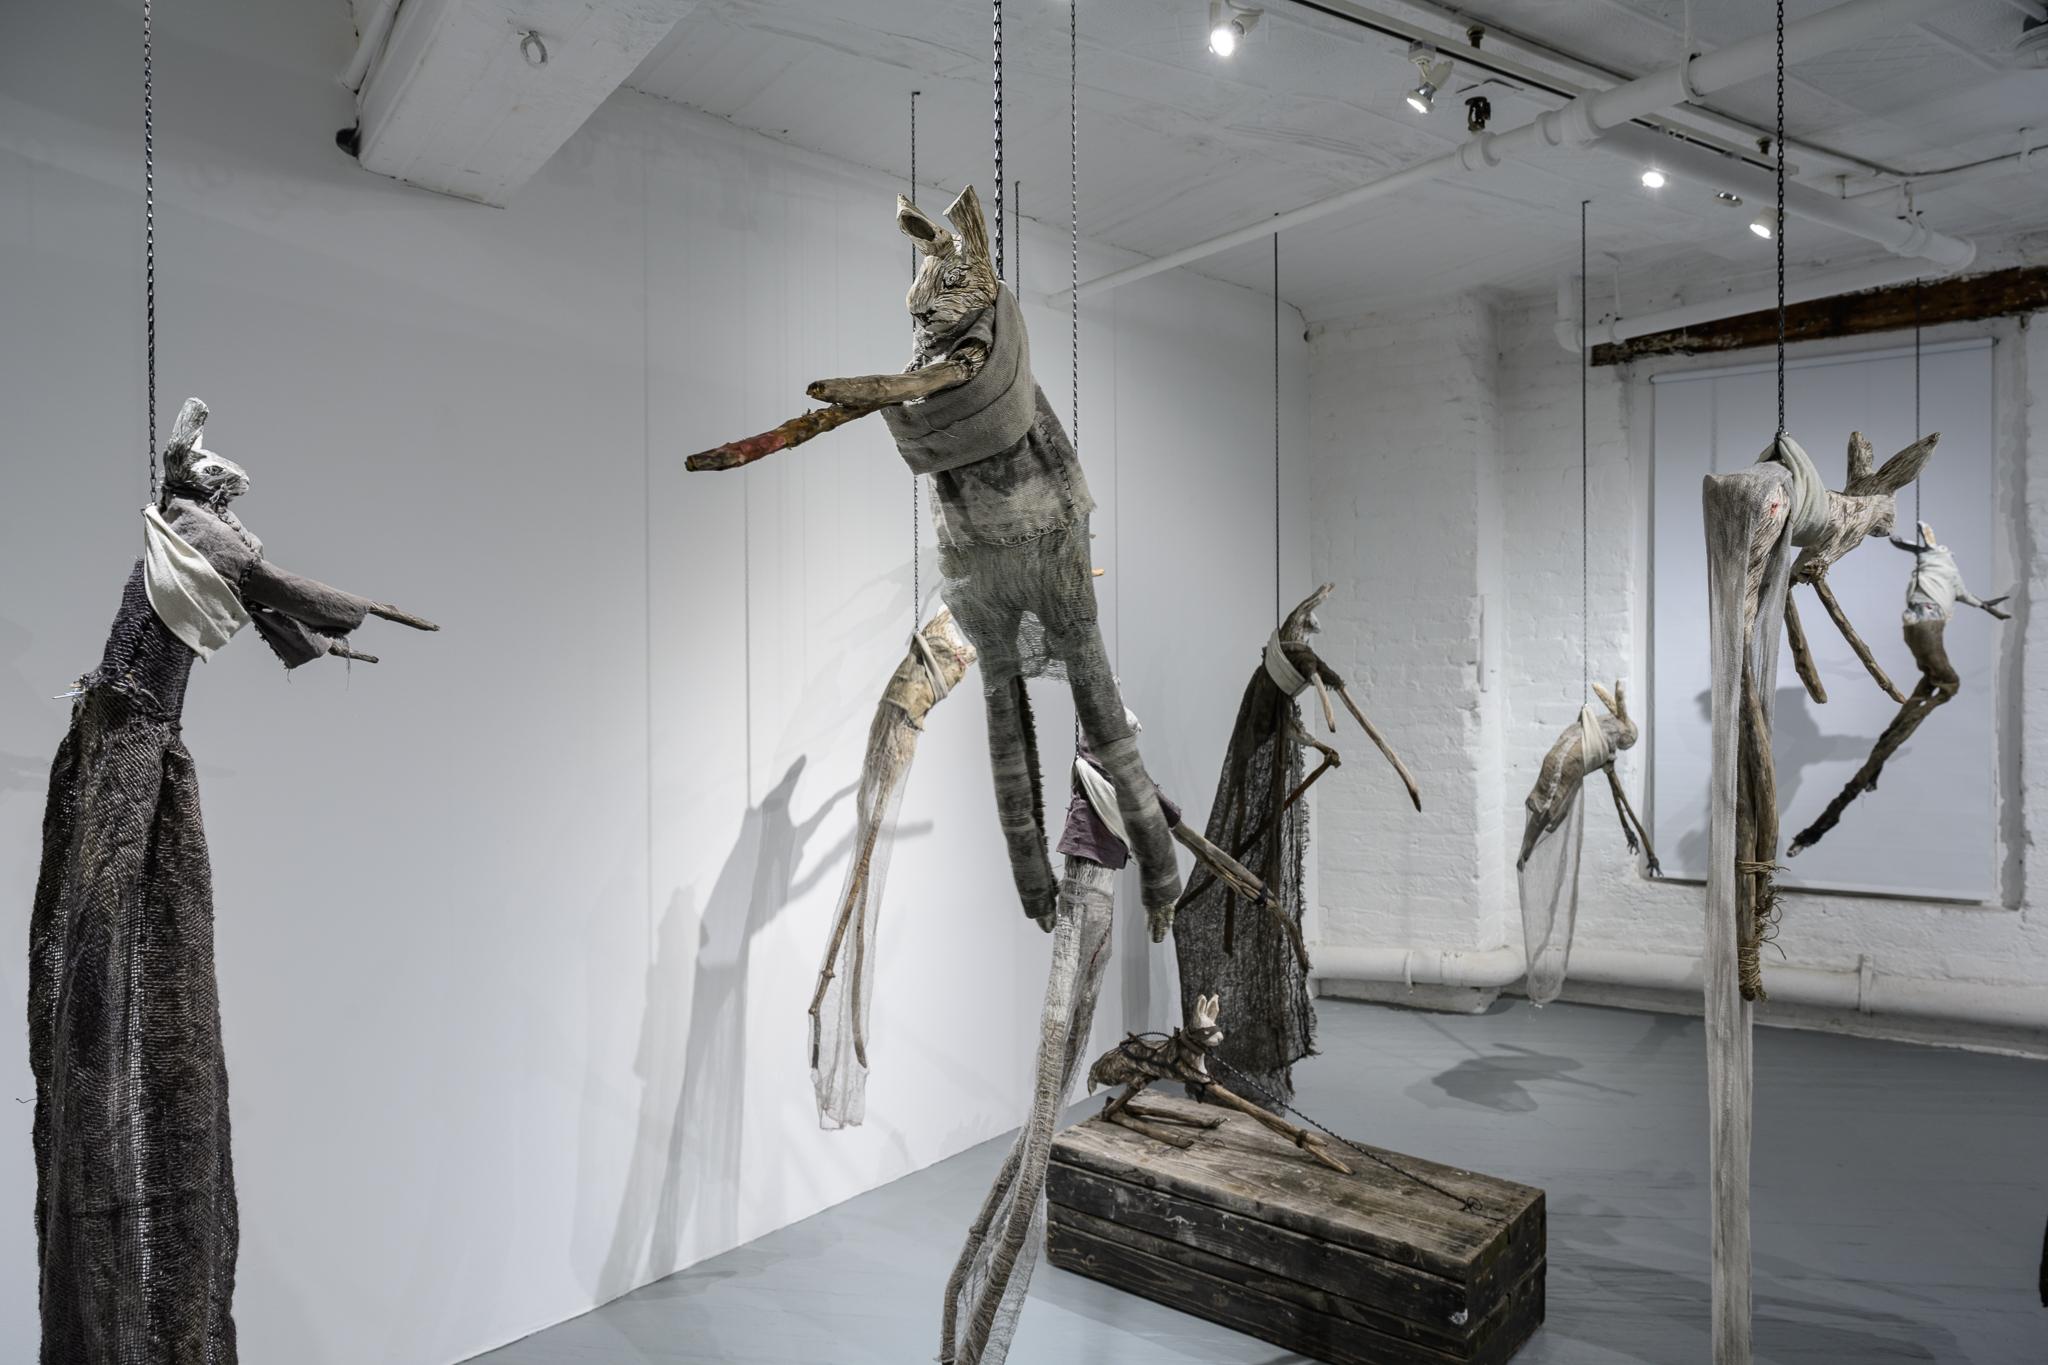 Sculpture of hare suspended from chain: 'Children 2' - Contemporary Mixed Media Art by Elizabeth Jordan